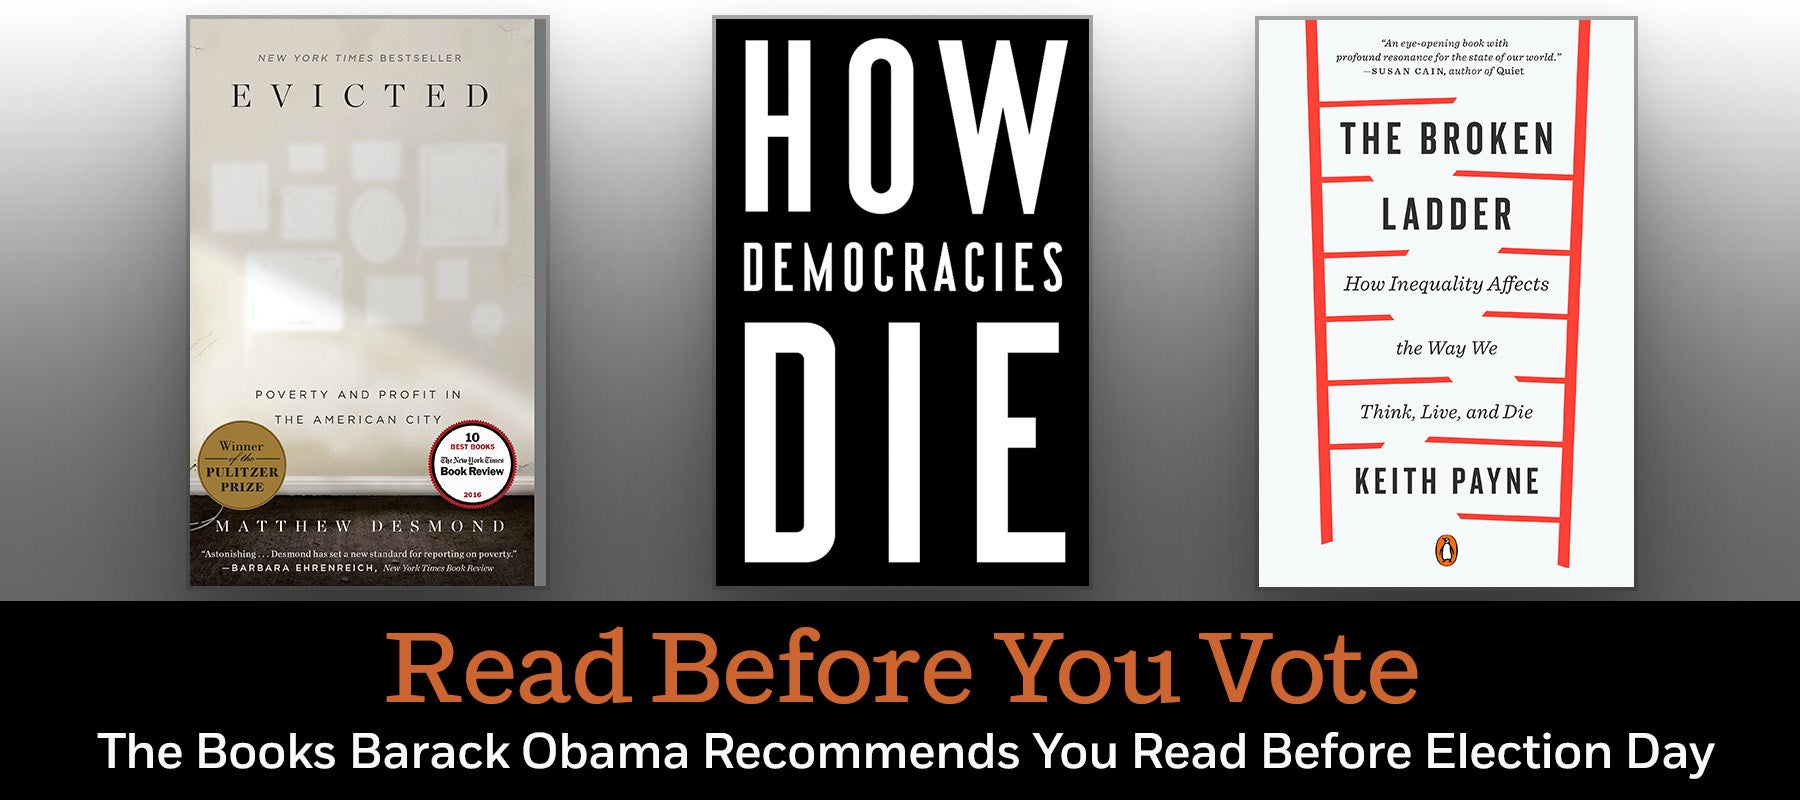 The 3 Penguin Random House Books Barack Obama Recommends You Read Before Election Day